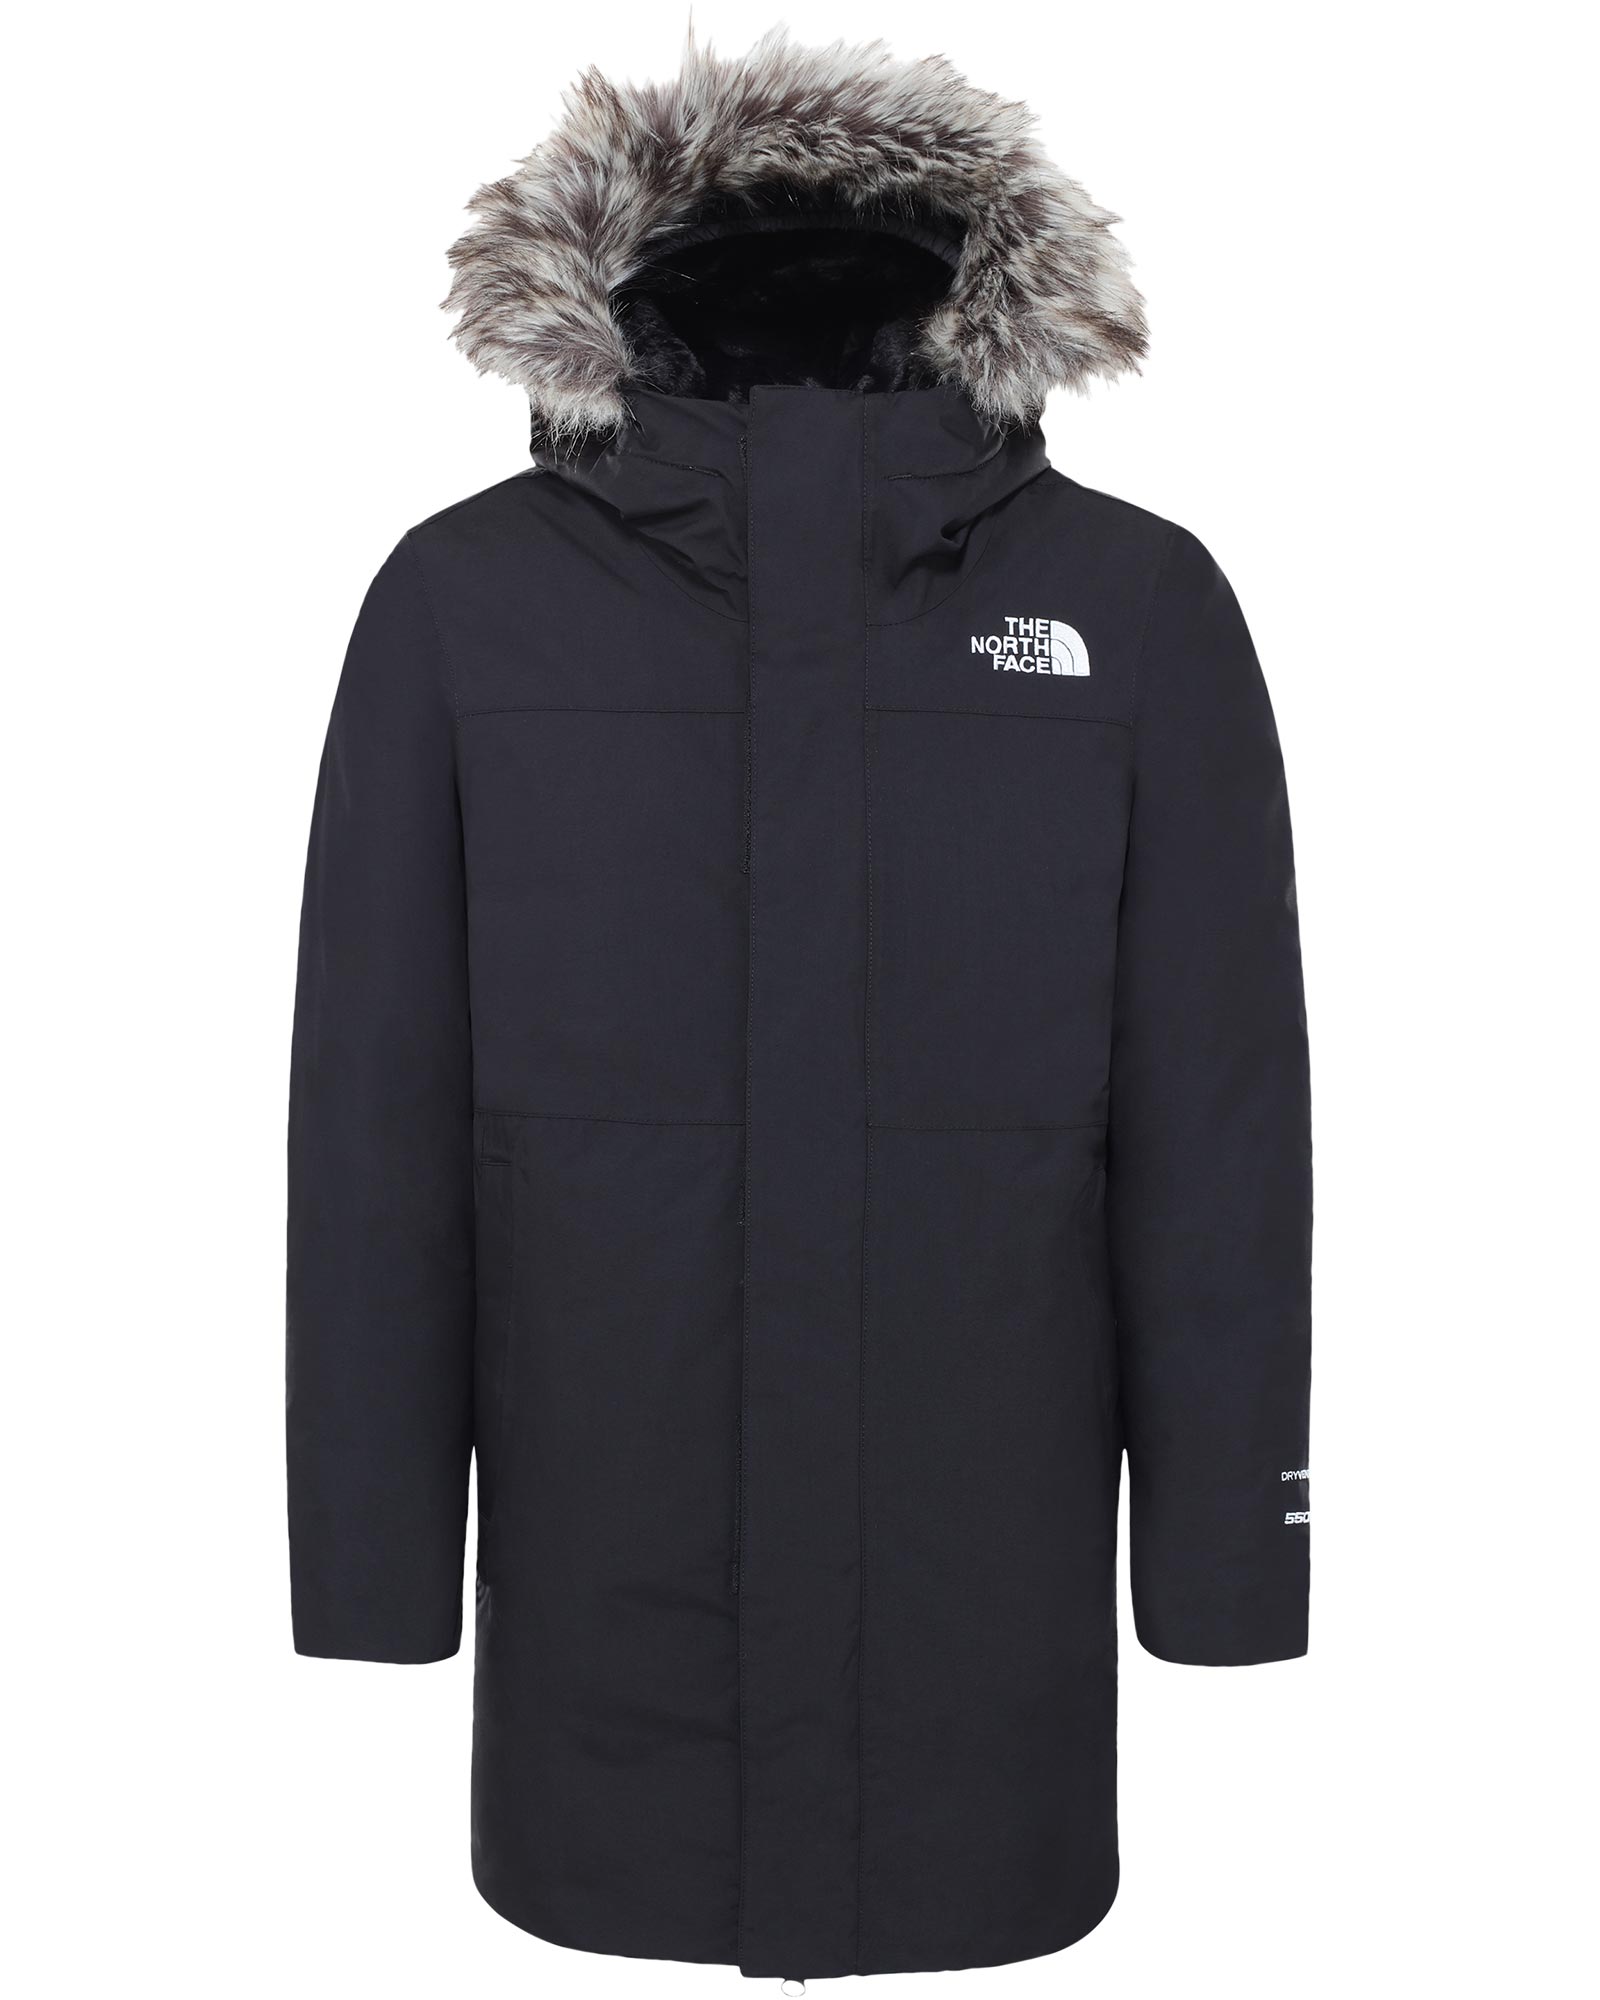 The North Face Arctic Swirl Girls Parka Jacket